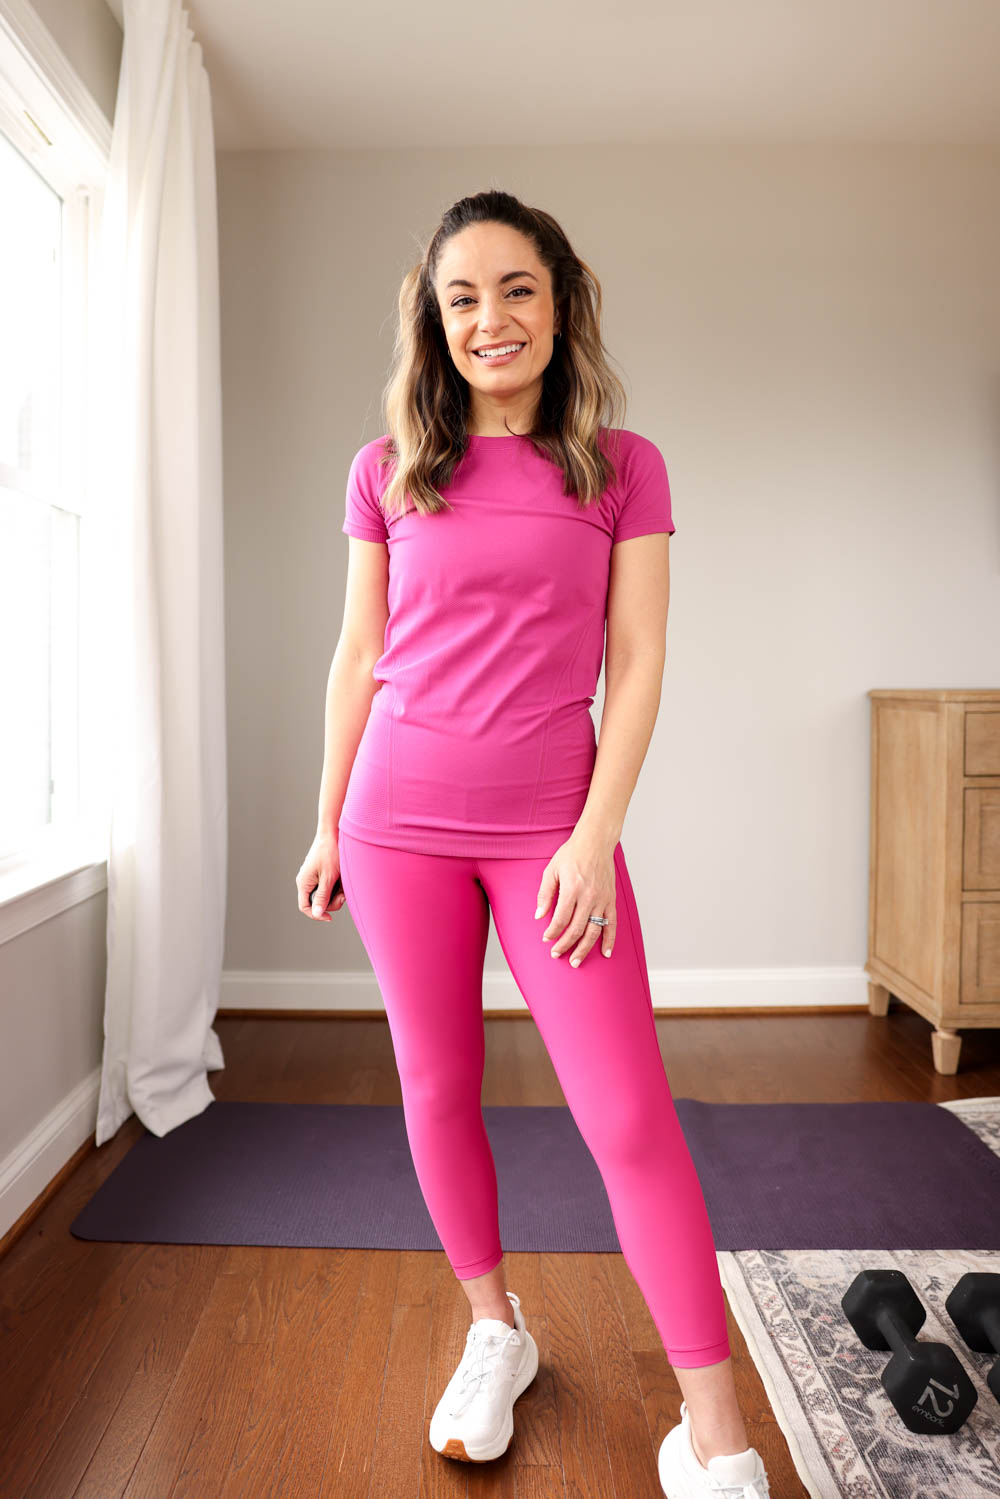 Petite-friendly activewear | outfits for workouts | pink workout outfits | petite style | athleta interval tights 